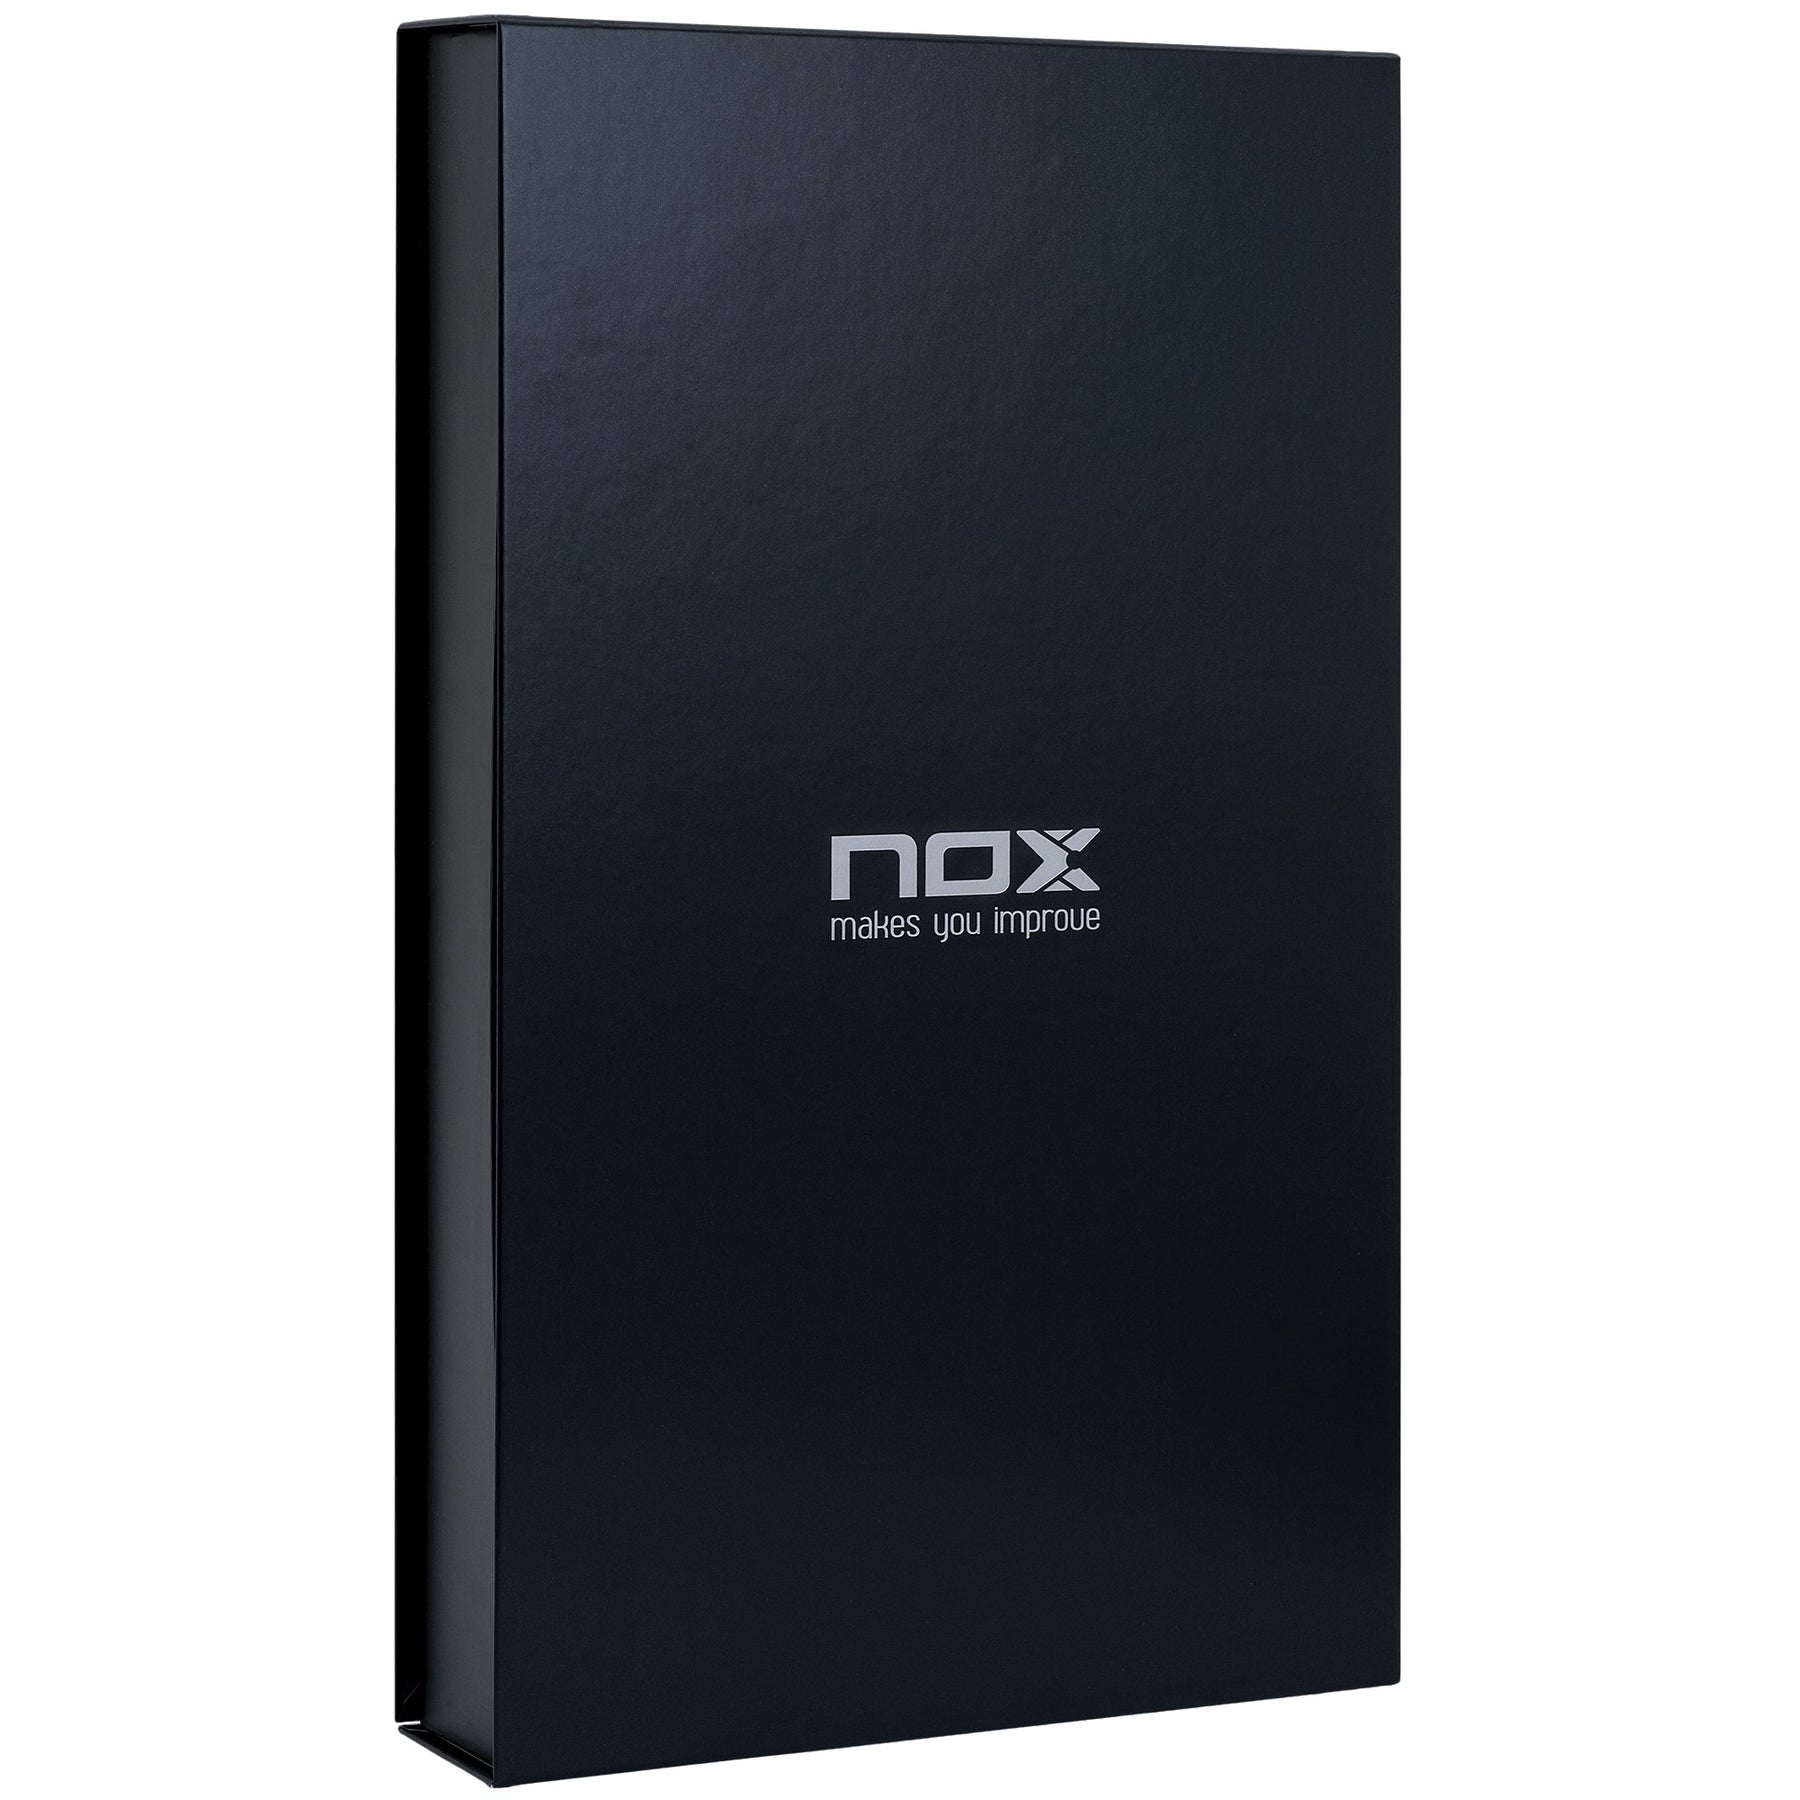 Nox AT10 Genius Limited Edition by Agustin Tapia